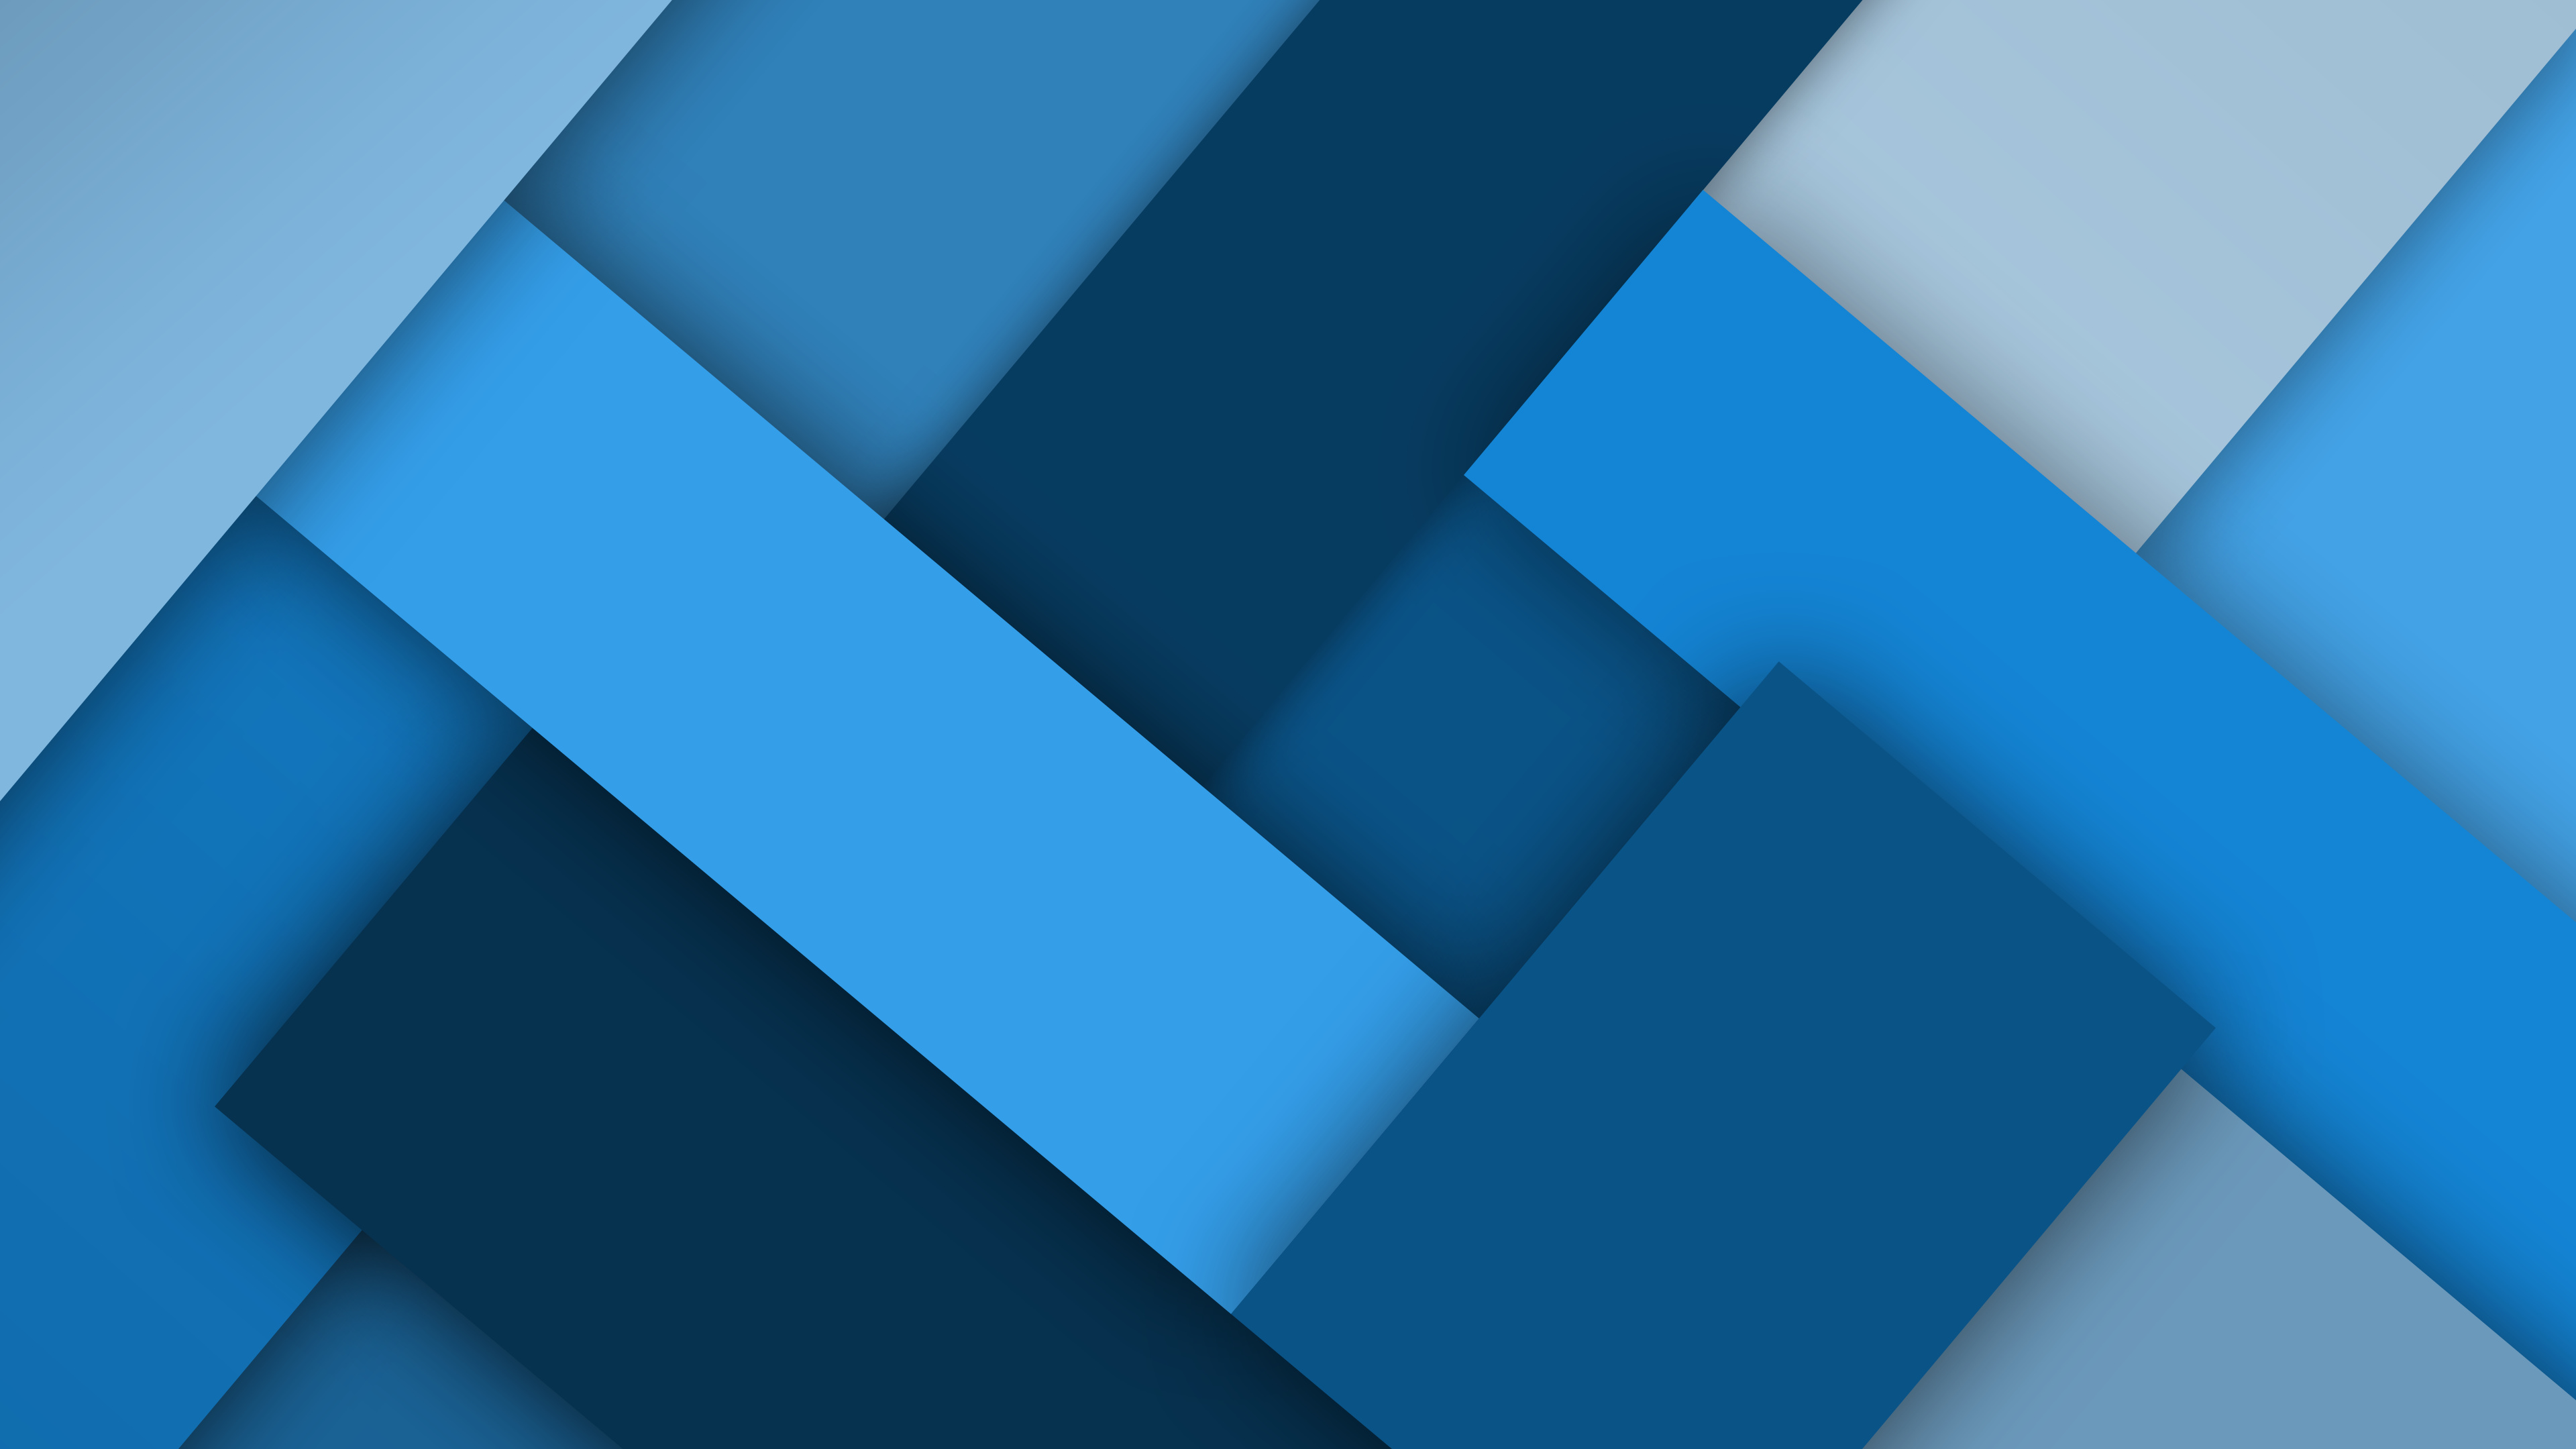 Backdrop: Blocks, Blue quadrilaterals, Simple figures, Right angles, Rectangles, Parallel sides. 3840x2160 4K Wallpaper.